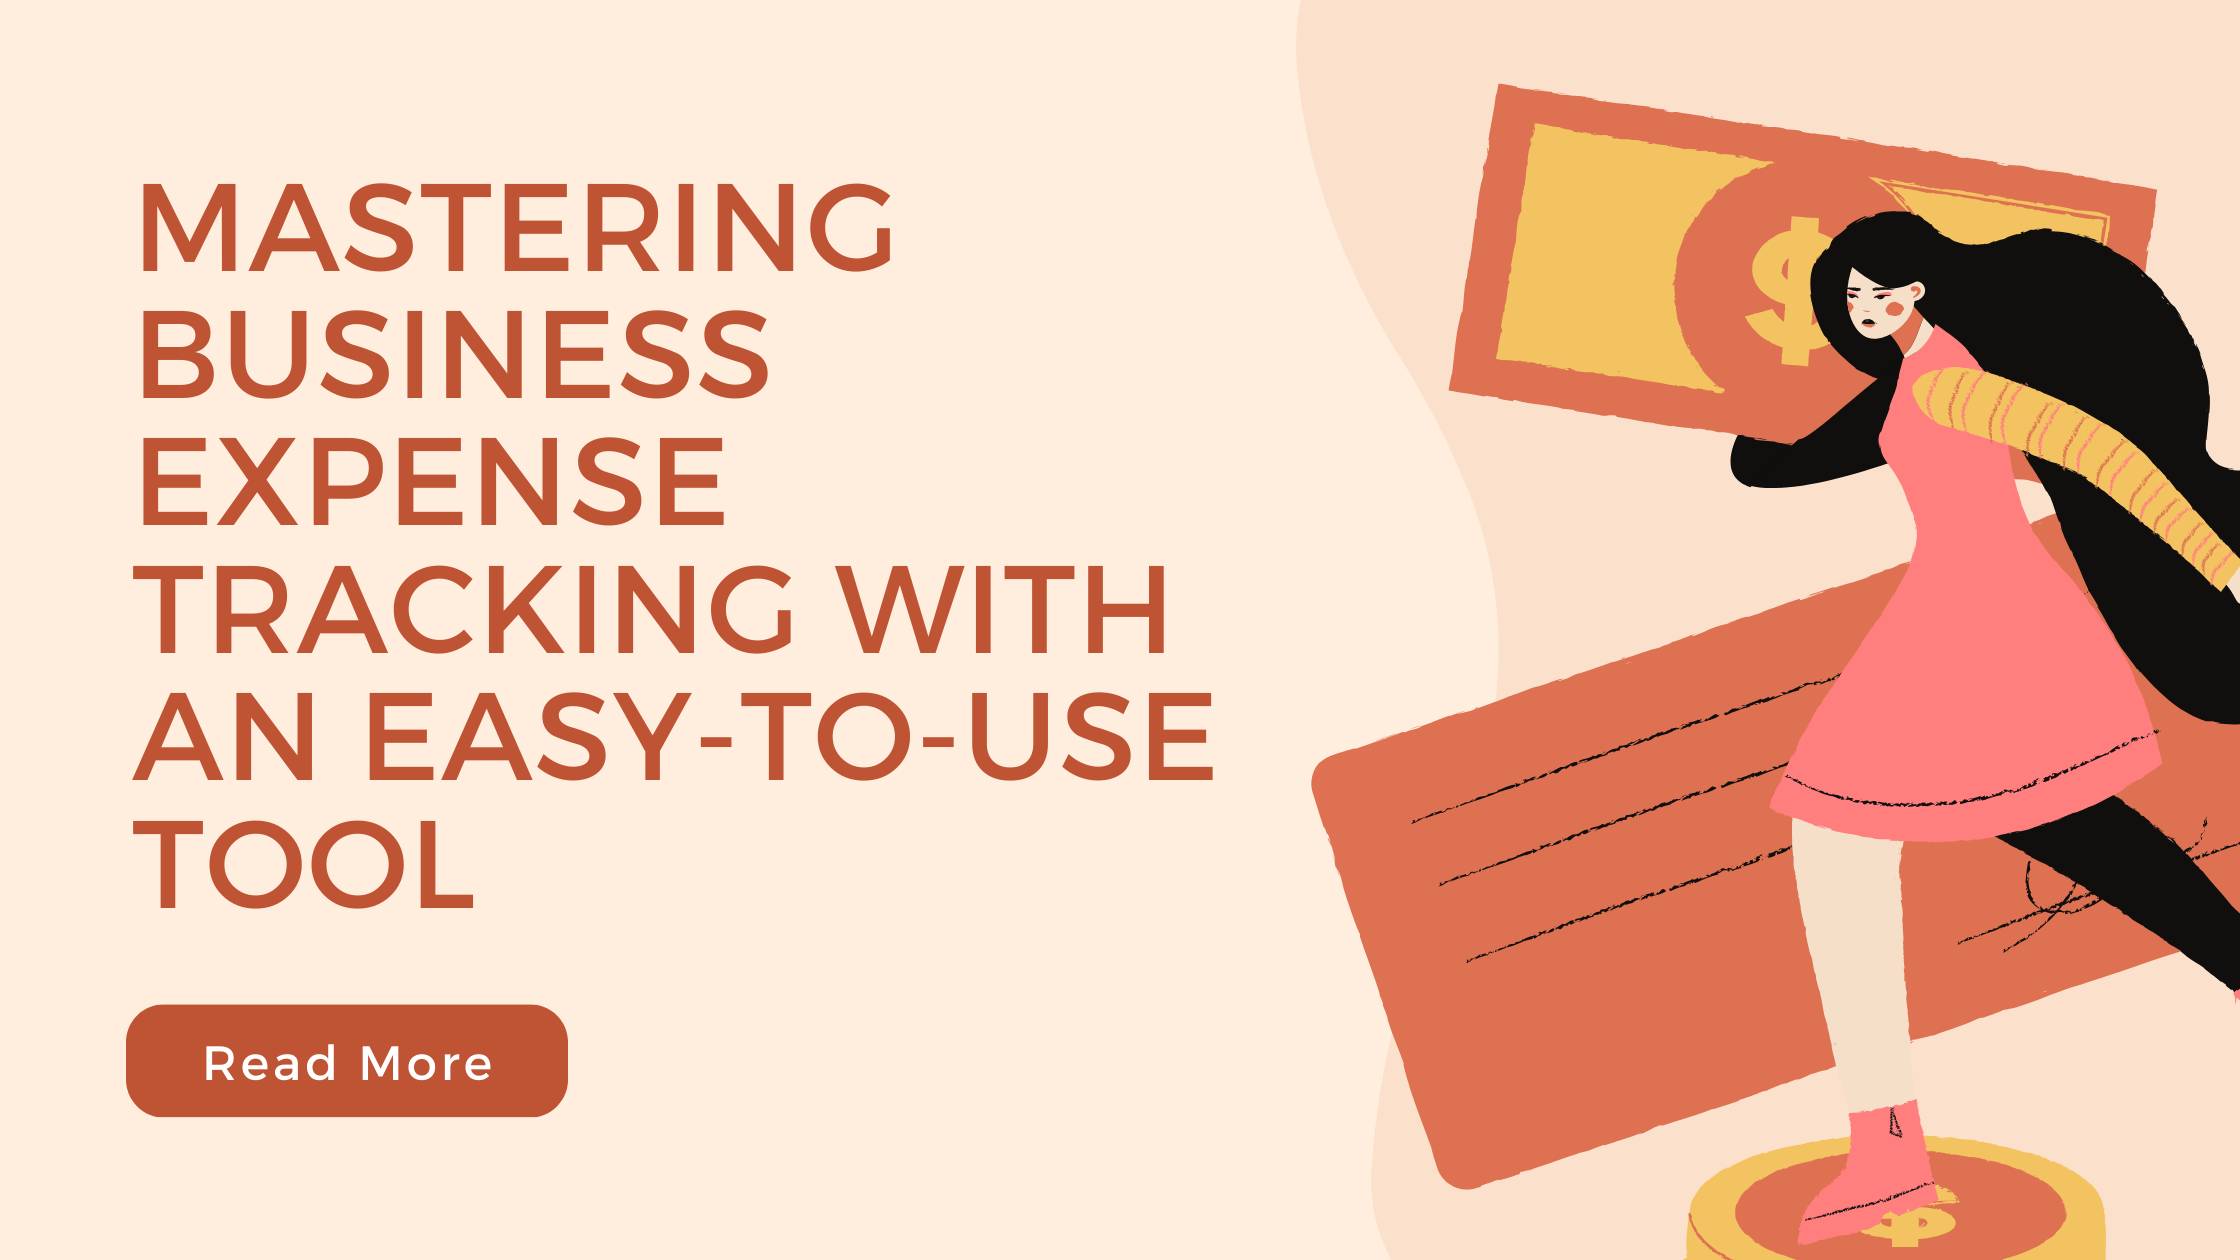 Mastering Business Expense Tracking/Automate Savings with An Easy-To-Use Tool